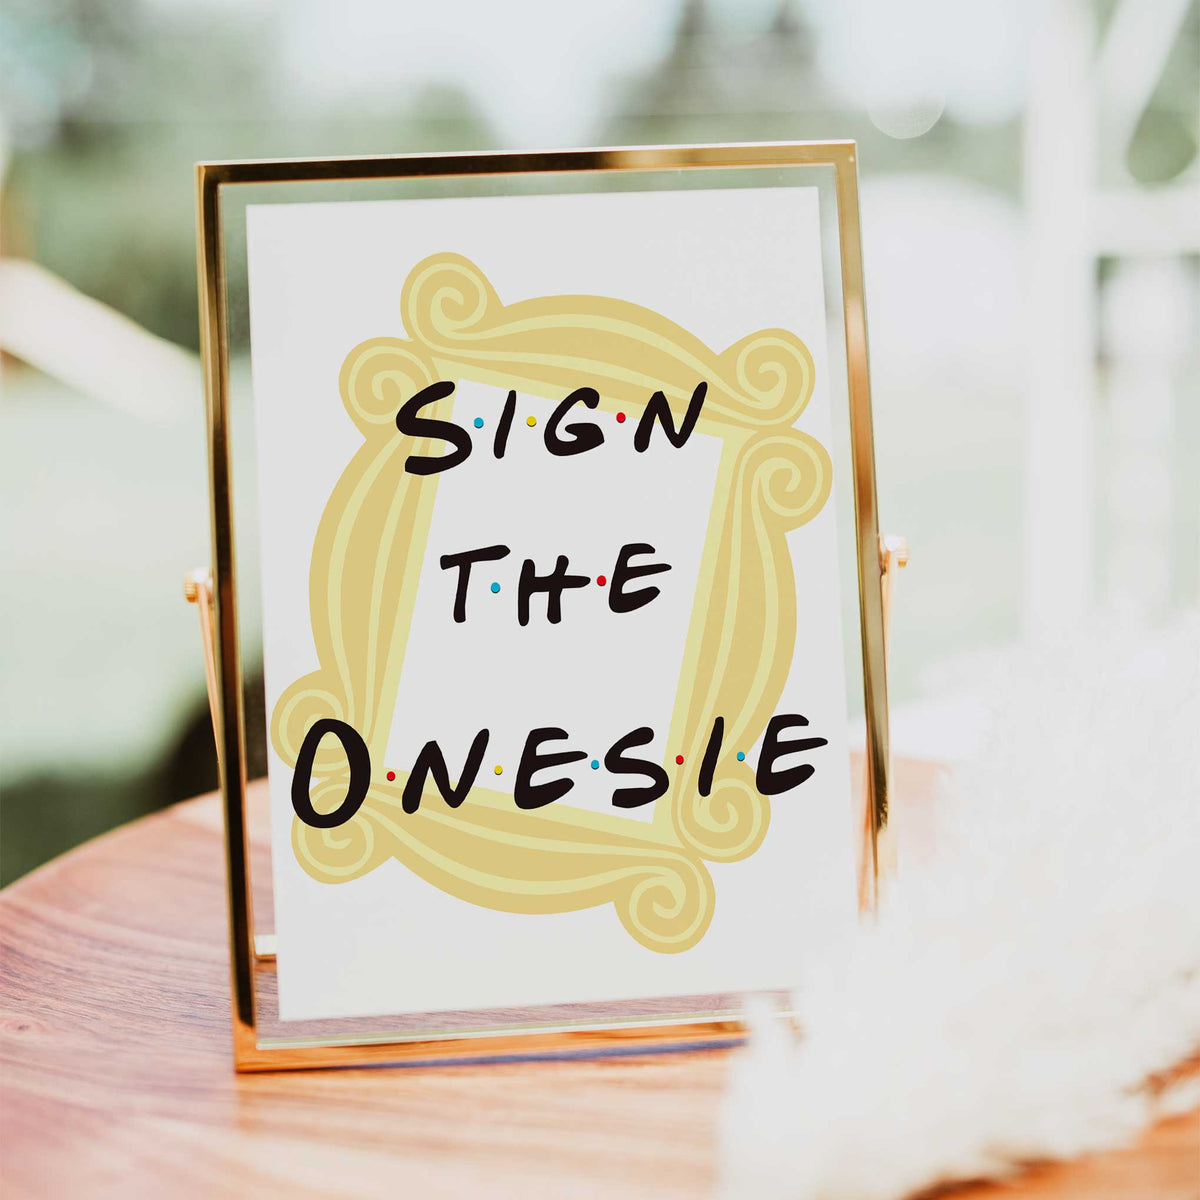 sign the onesie baby sign, Printable baby shower games, friends fun baby games, baby shower games, fun baby shower ideas, top baby shower ideas, friends baby shower, friends baby shower ideas